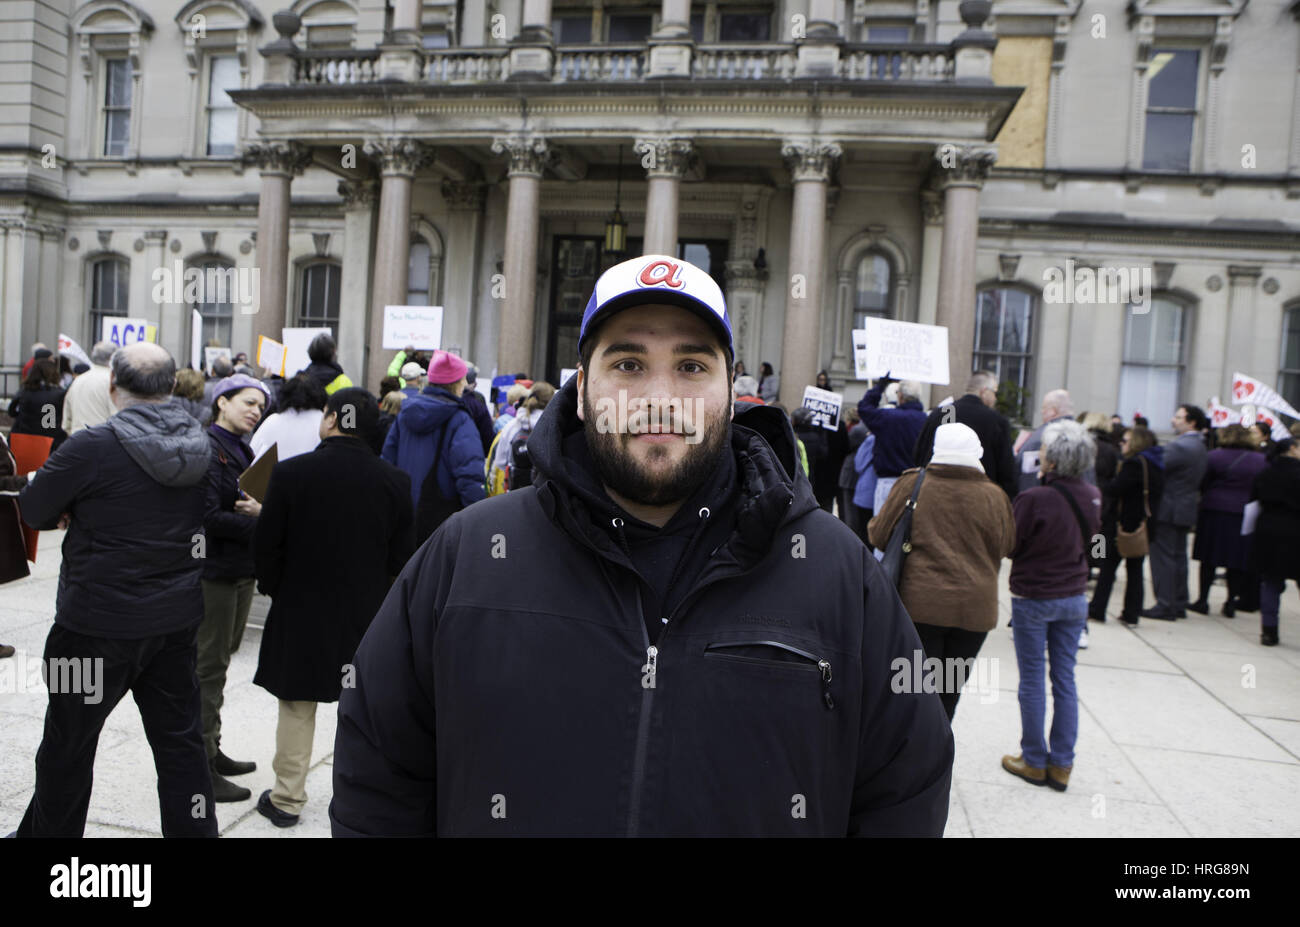 Trenton, New Jersey, USA. 27th Feb, 2017. NICK RUGGIA, 30, of a media freelancer of Jersey City, New Jersey expressed his concern for the Affordable Cares Act that may be repealed during a rally at the Statehouse in Trenton, New Jersey. Ruggia suffers from obsessive compulsive disorder, also known as, OCD. "For the last four years"" he has been "ACA related health programs."" "Having access through medication has allowed me to lead a productive, interesting and fun life."" "If you take away our access to health care you are literally threatening our basic existence"" said Ru Stock Photo